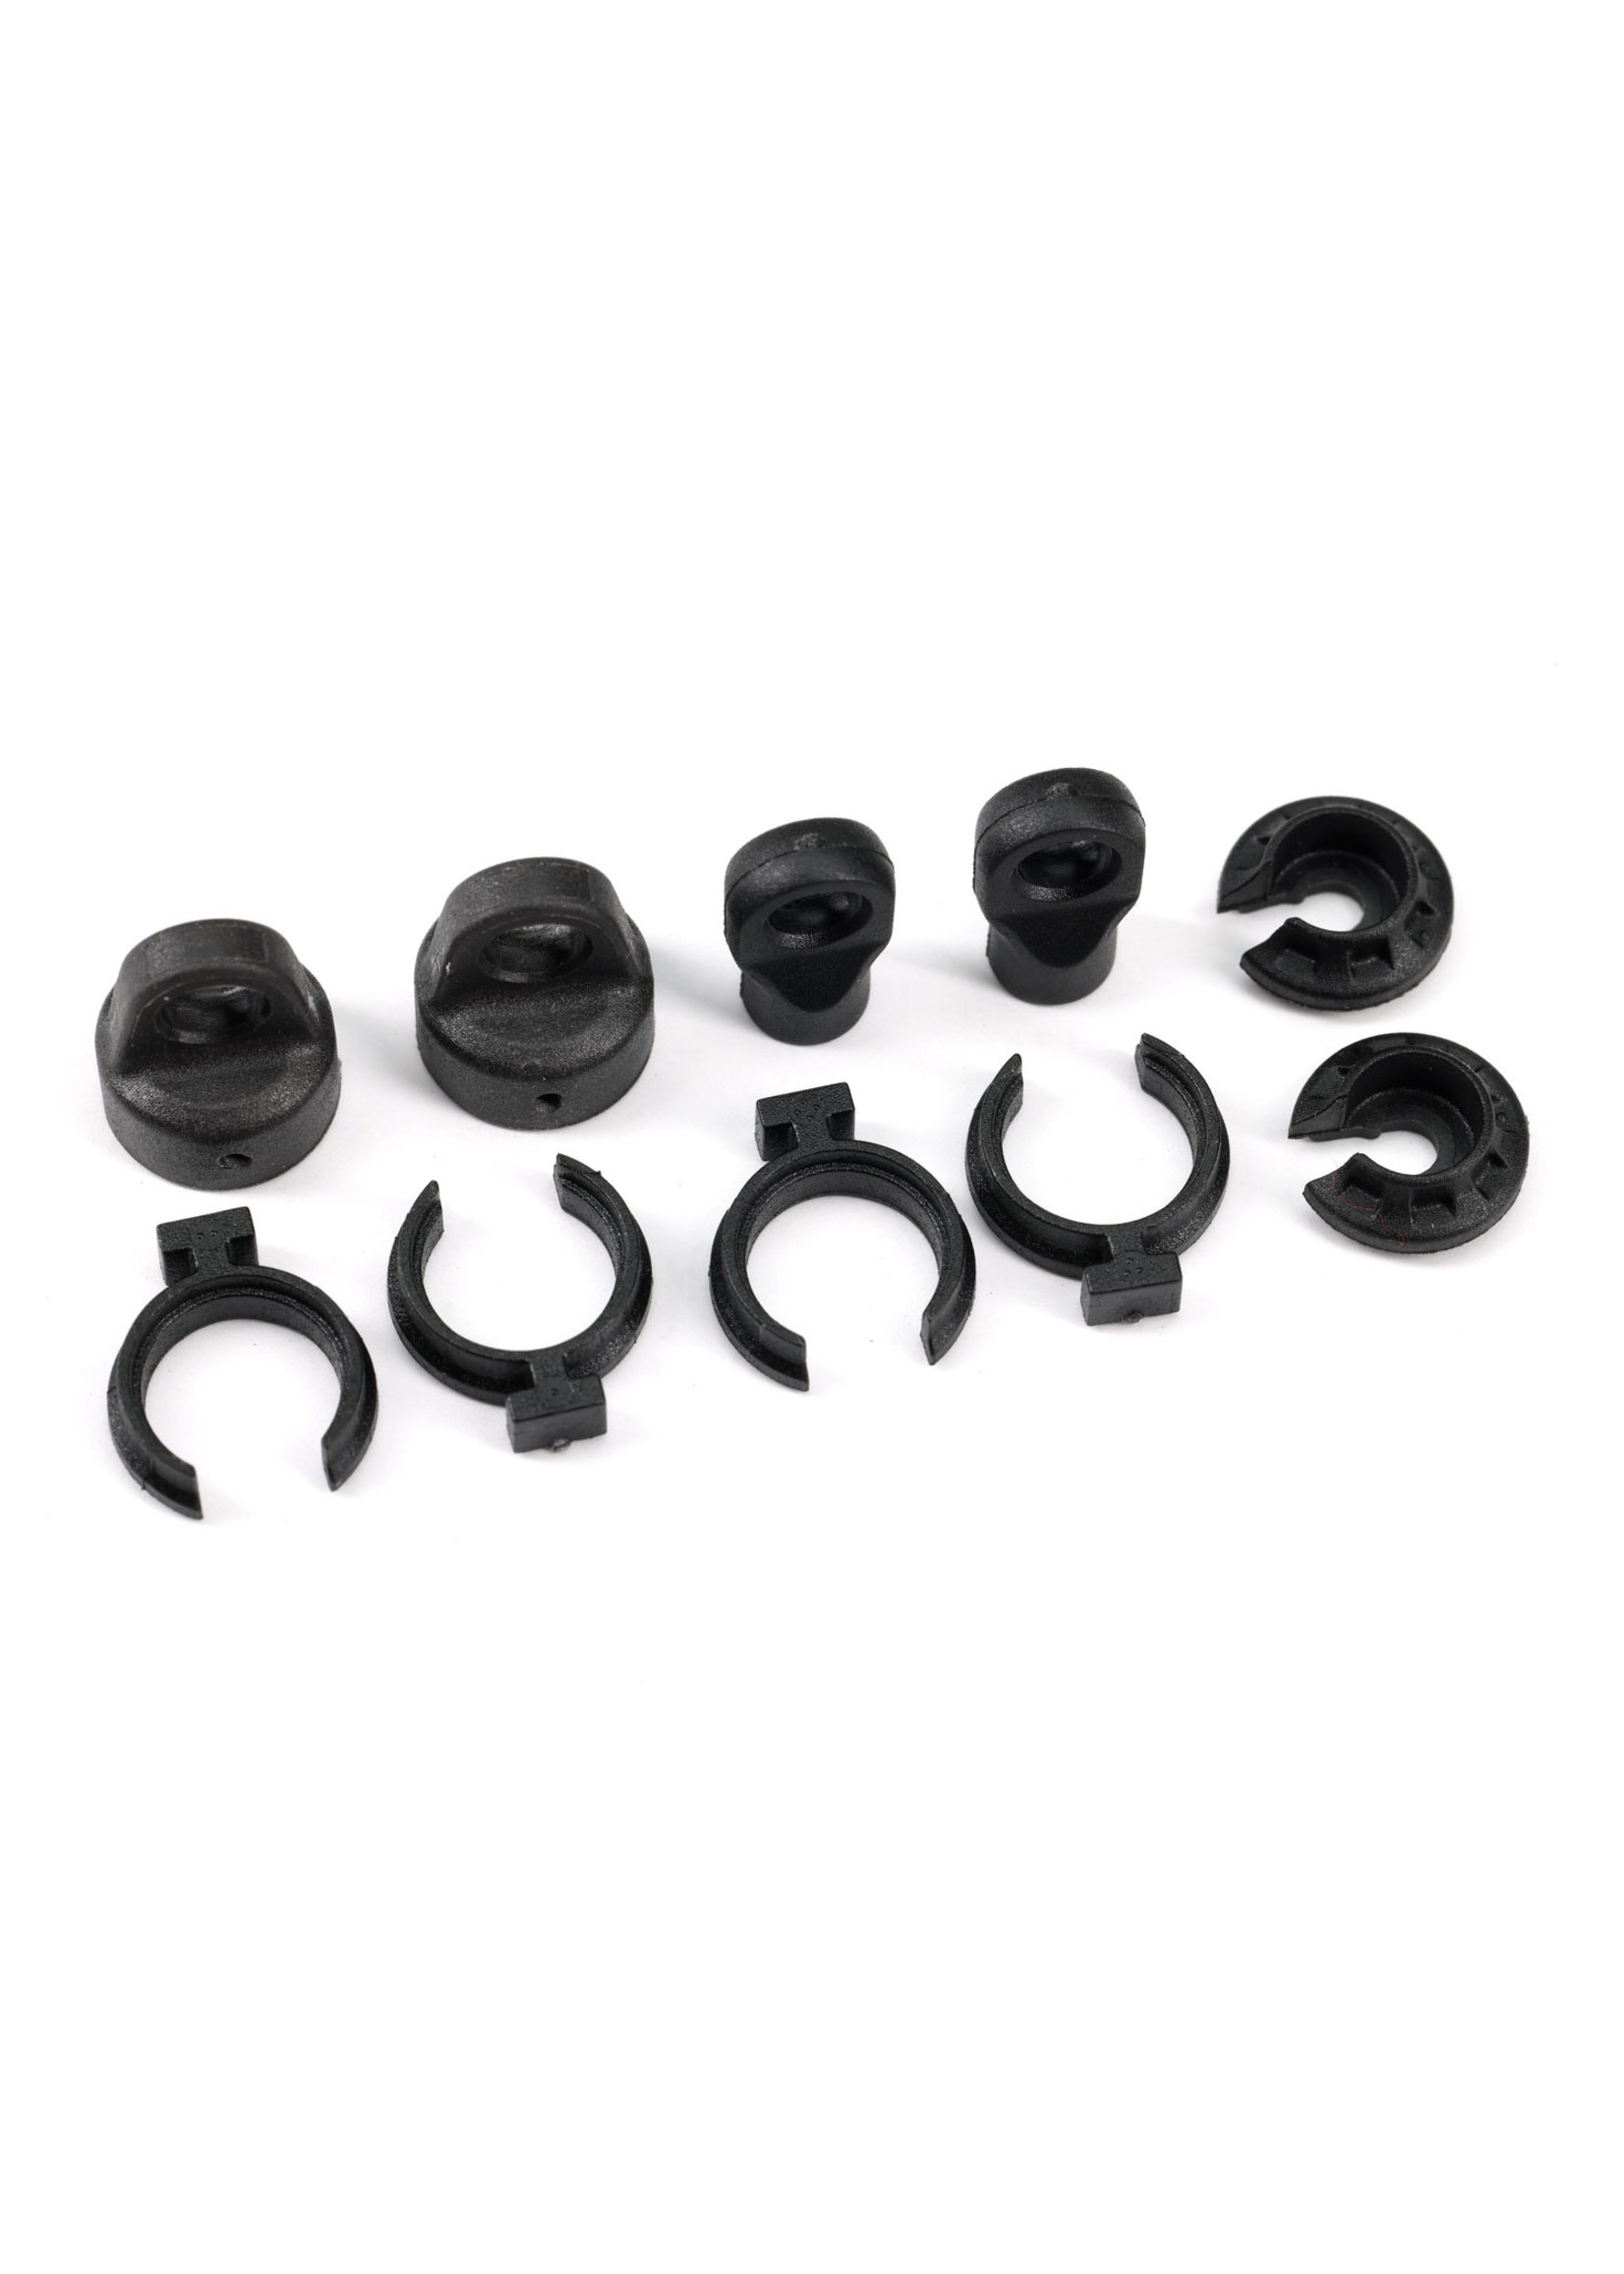 Traxxas 9762A - Shock Caps, Spacers, Retainers